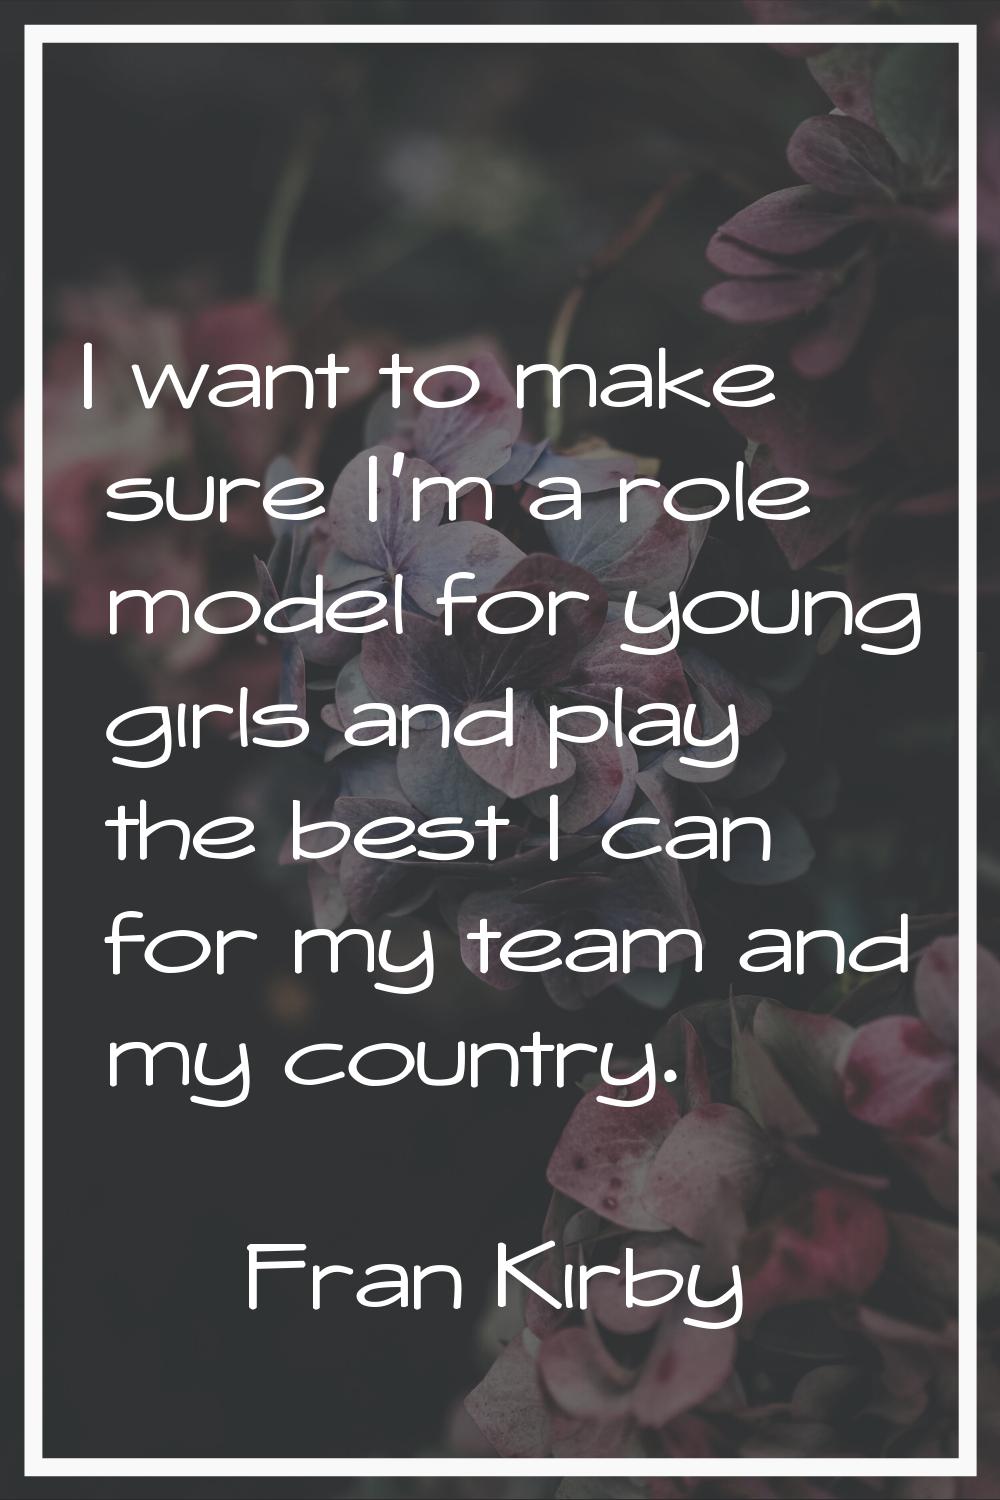 I want to make sure I'm a role model for young girls and play the best I can for my team and my cou